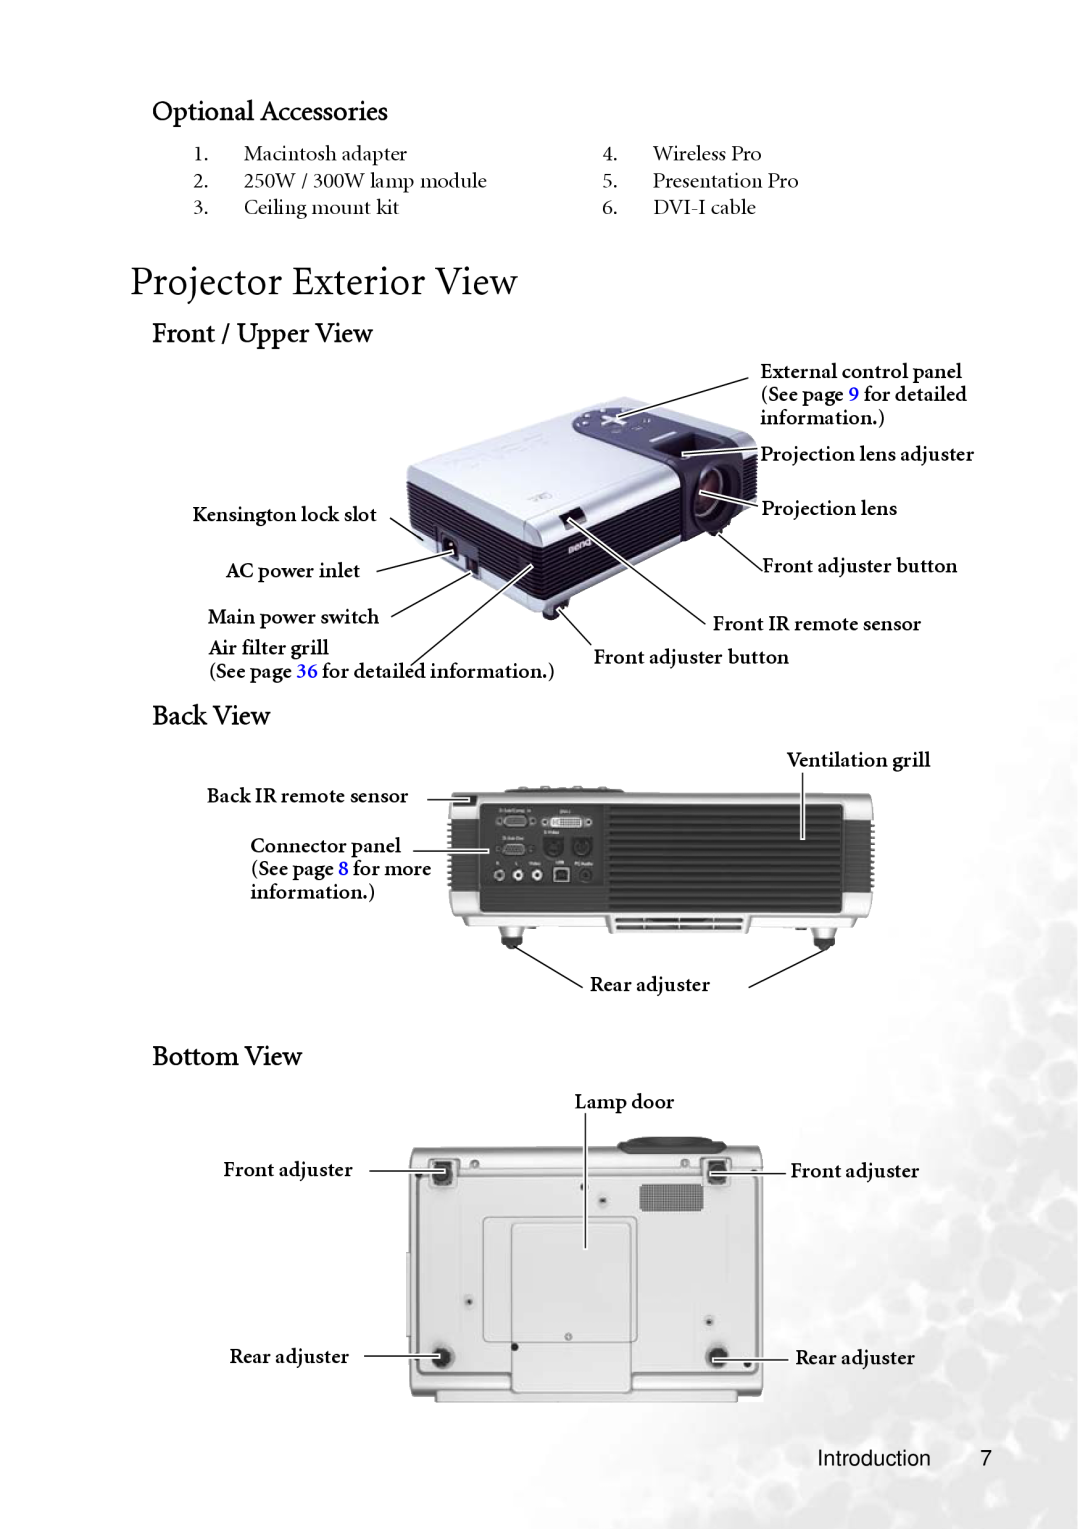 BenQ PB8250 Projector Exterior View, Optional Accessories, Front / Upper View, Back View, Bottom View, Air filter grill 